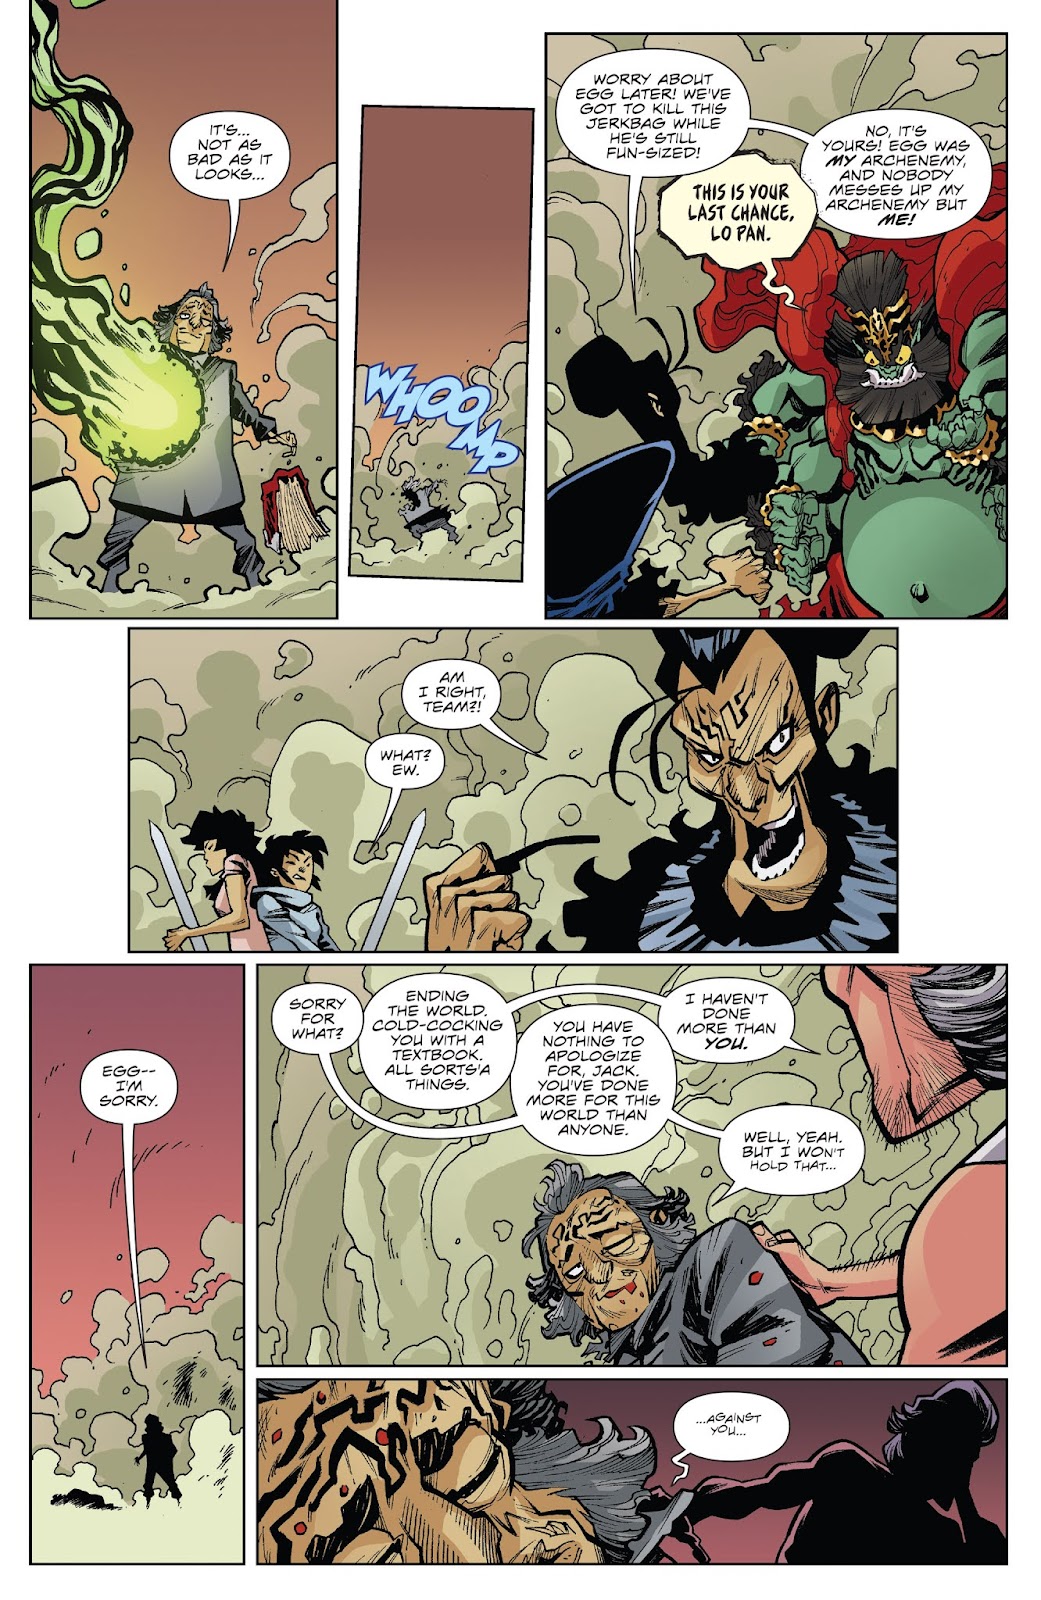 Big Trouble in Little China: Old Man Jack issue 9 - Page 16